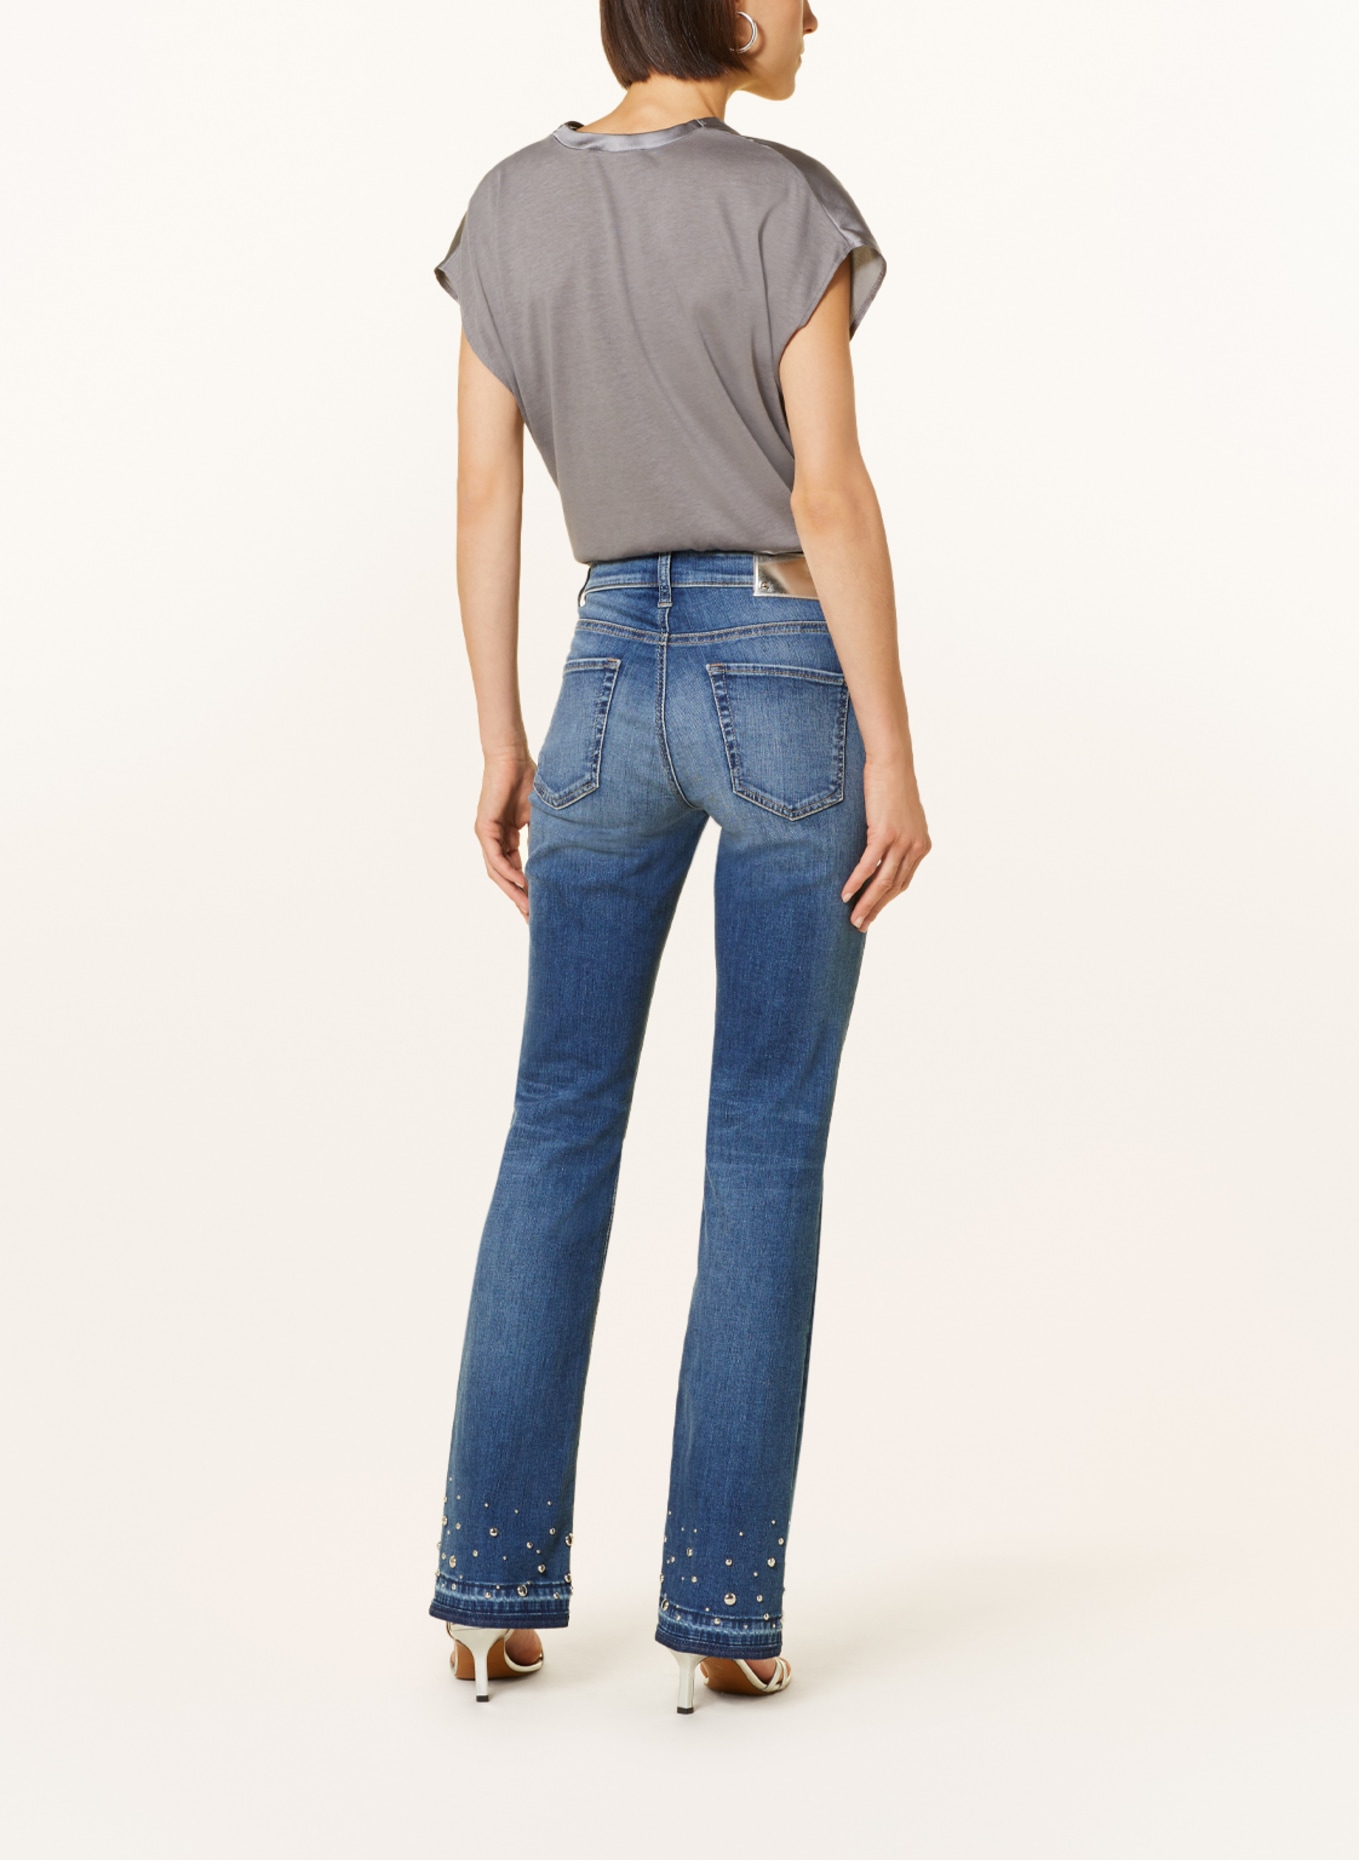 CAMBIO Flared jeans PARIS with rivets, Color: 5138 mid used contrast open he (Image 3)